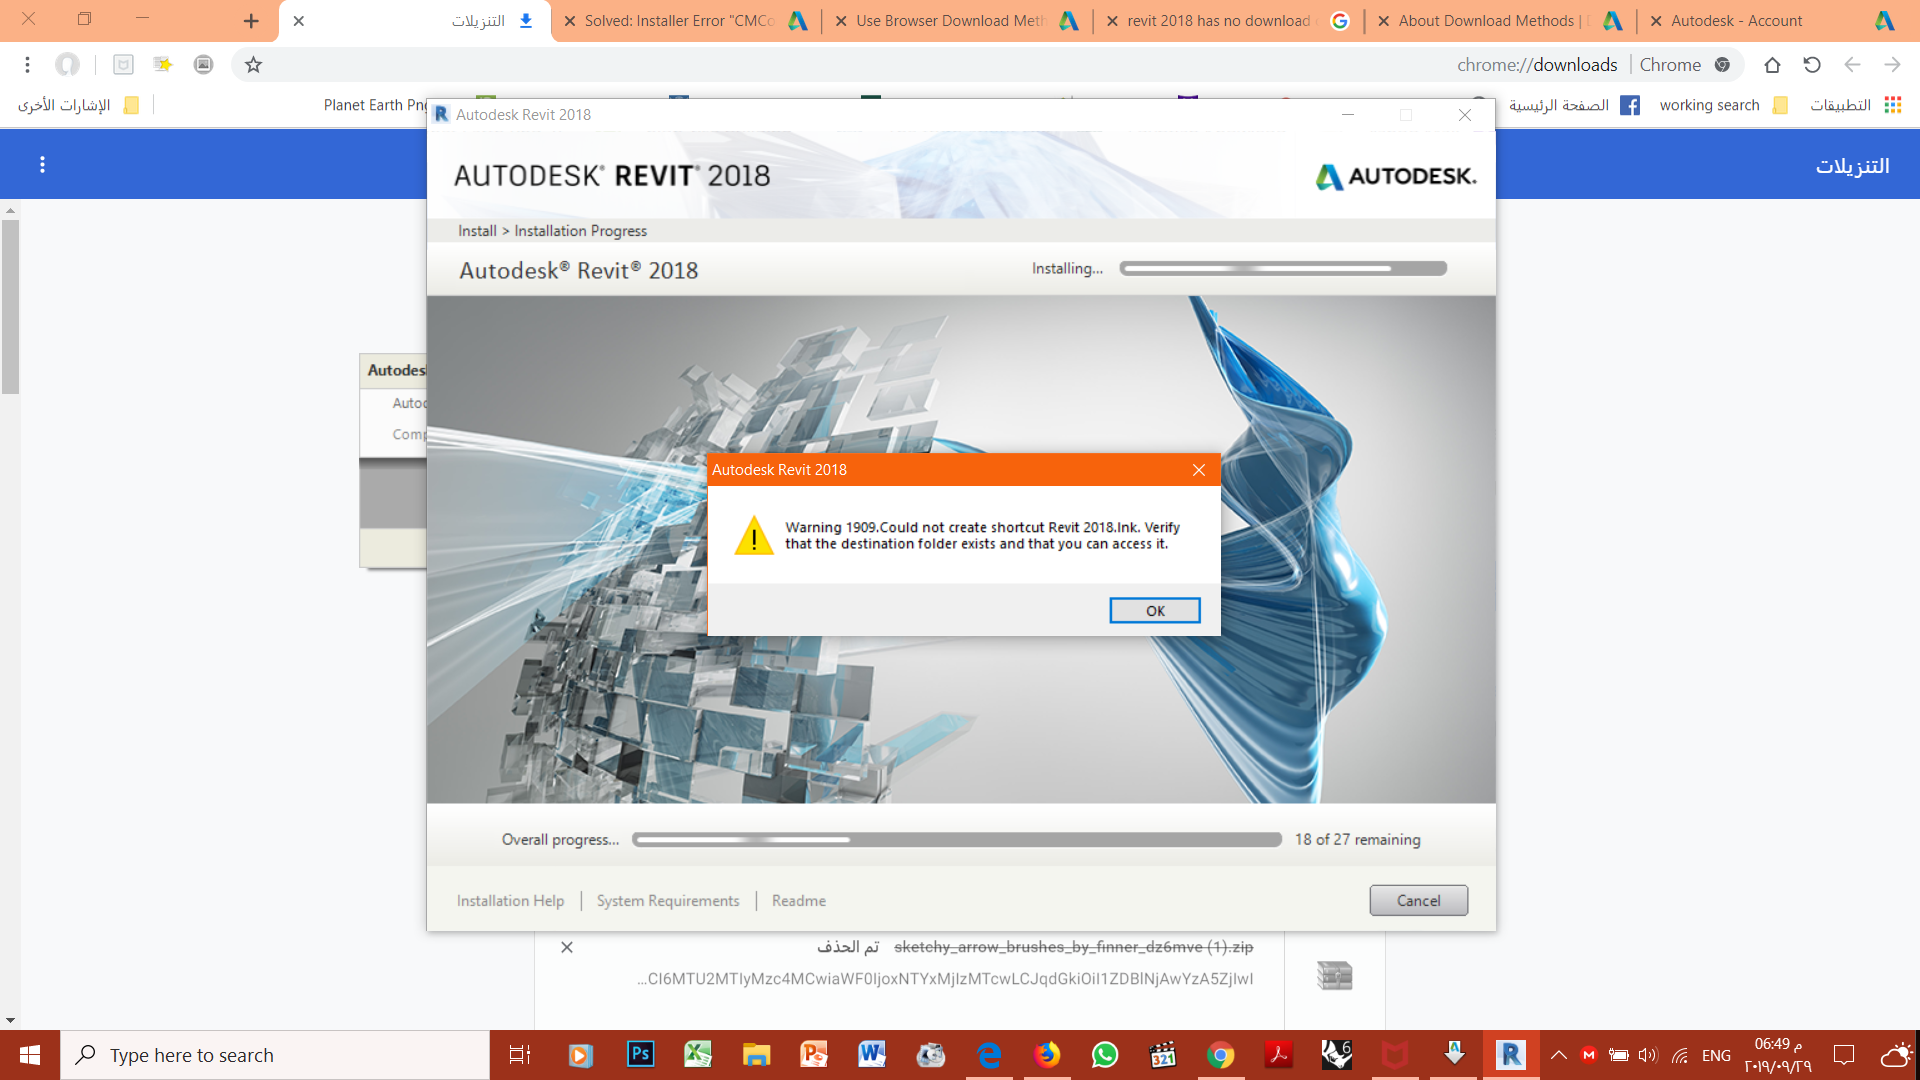 creating temporary files problem + warning 1909 when installing autodesk revit 2018 78b20d0a-9e14-4574-91a3-a7ad76cbe580?upload=true.png